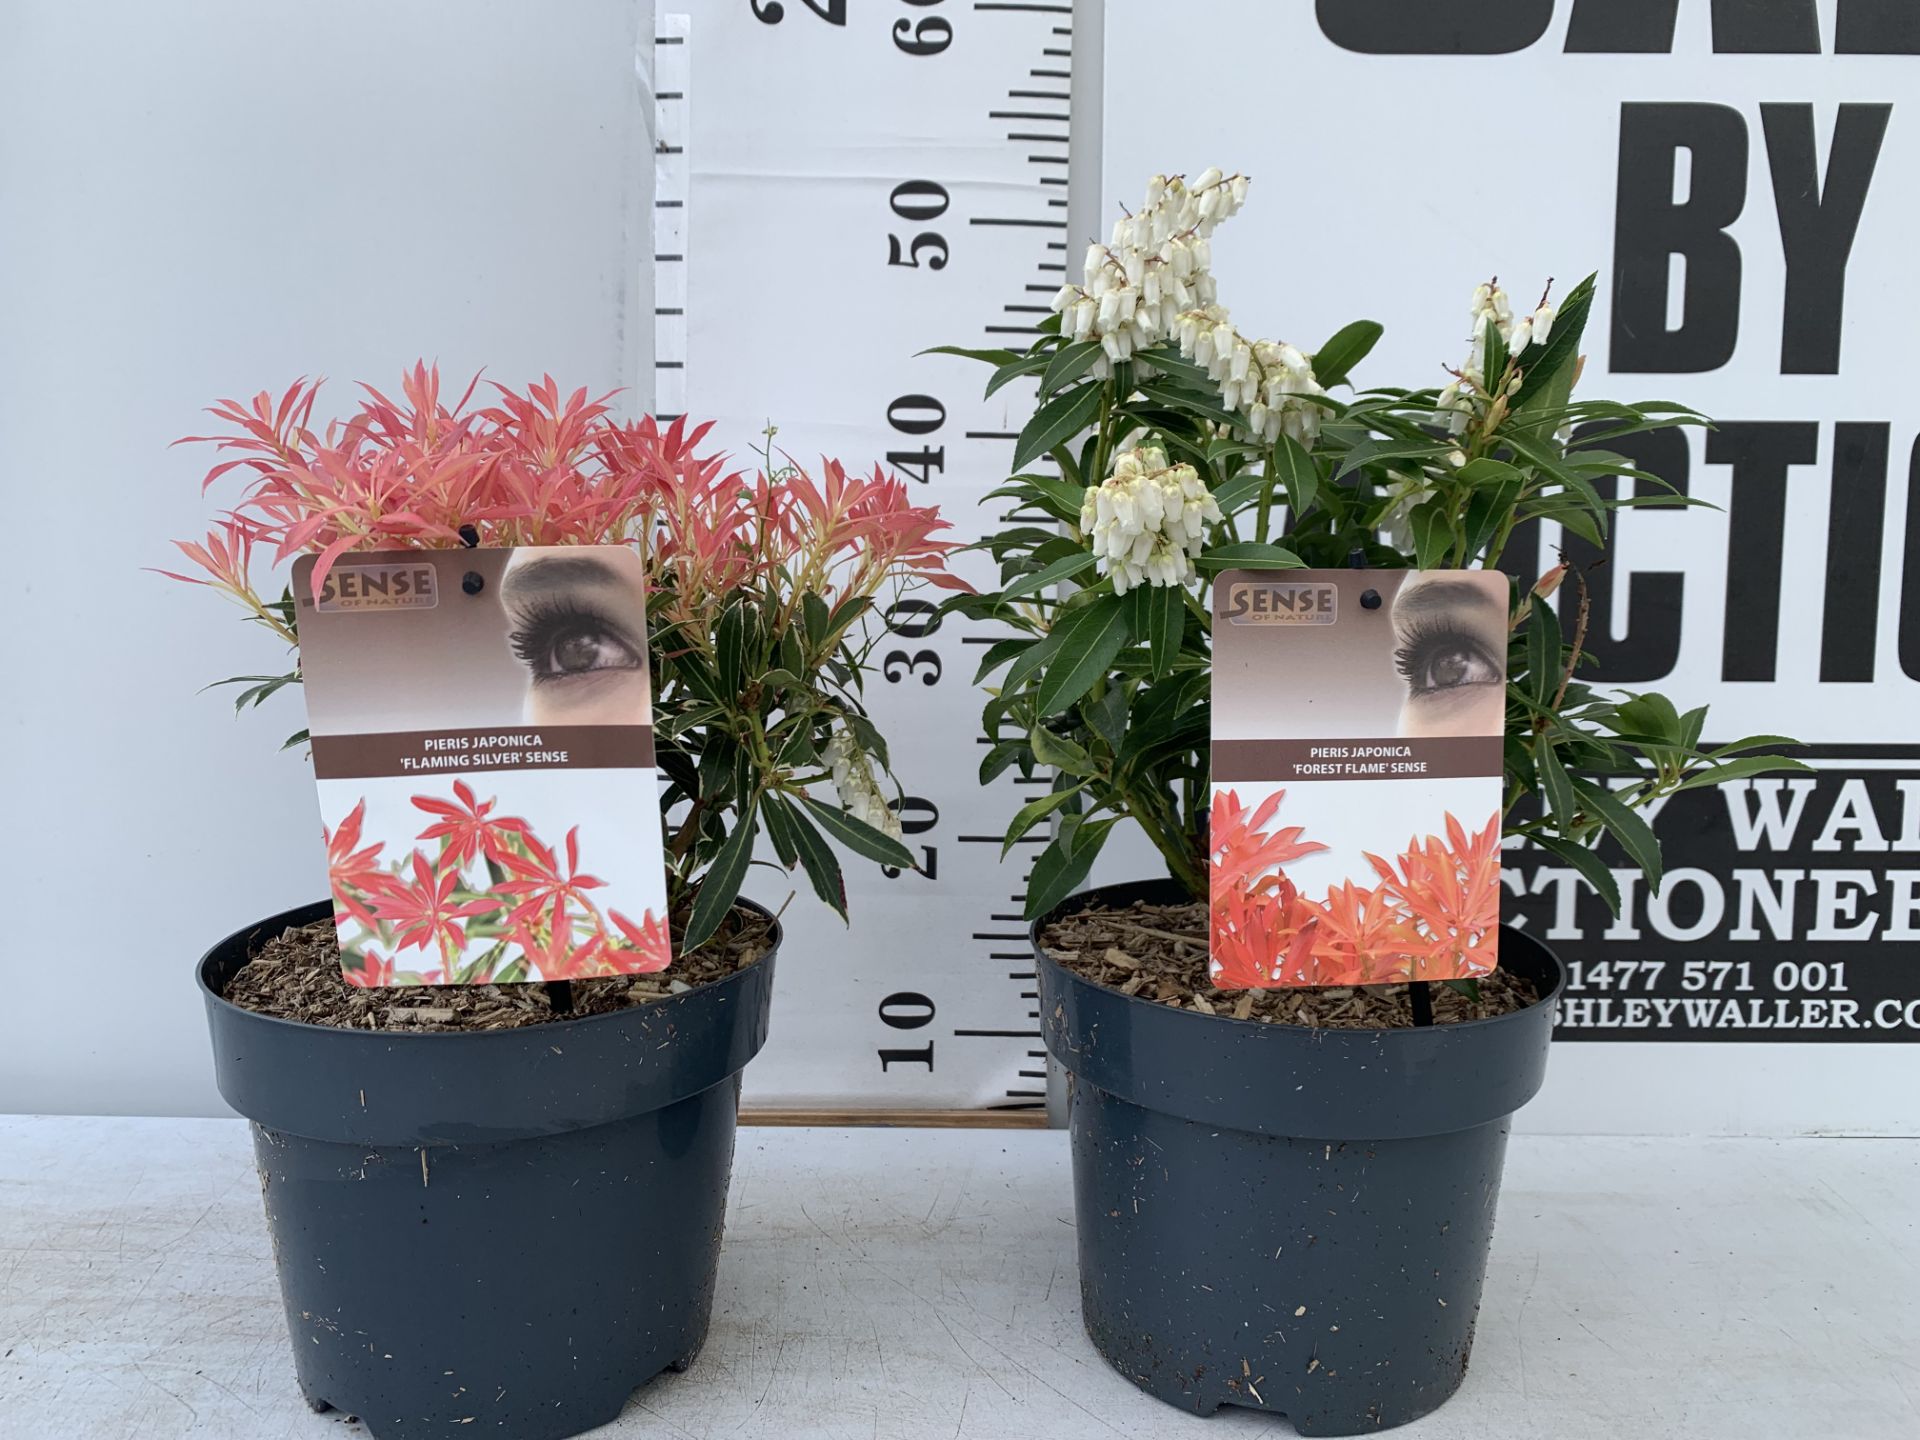 TWO PIERIS JAPONICA FORSET FLAME AND FLAMING SILVER IN 3 LTR POTS 40CM TALL PLUS VAT TO BE SOLD